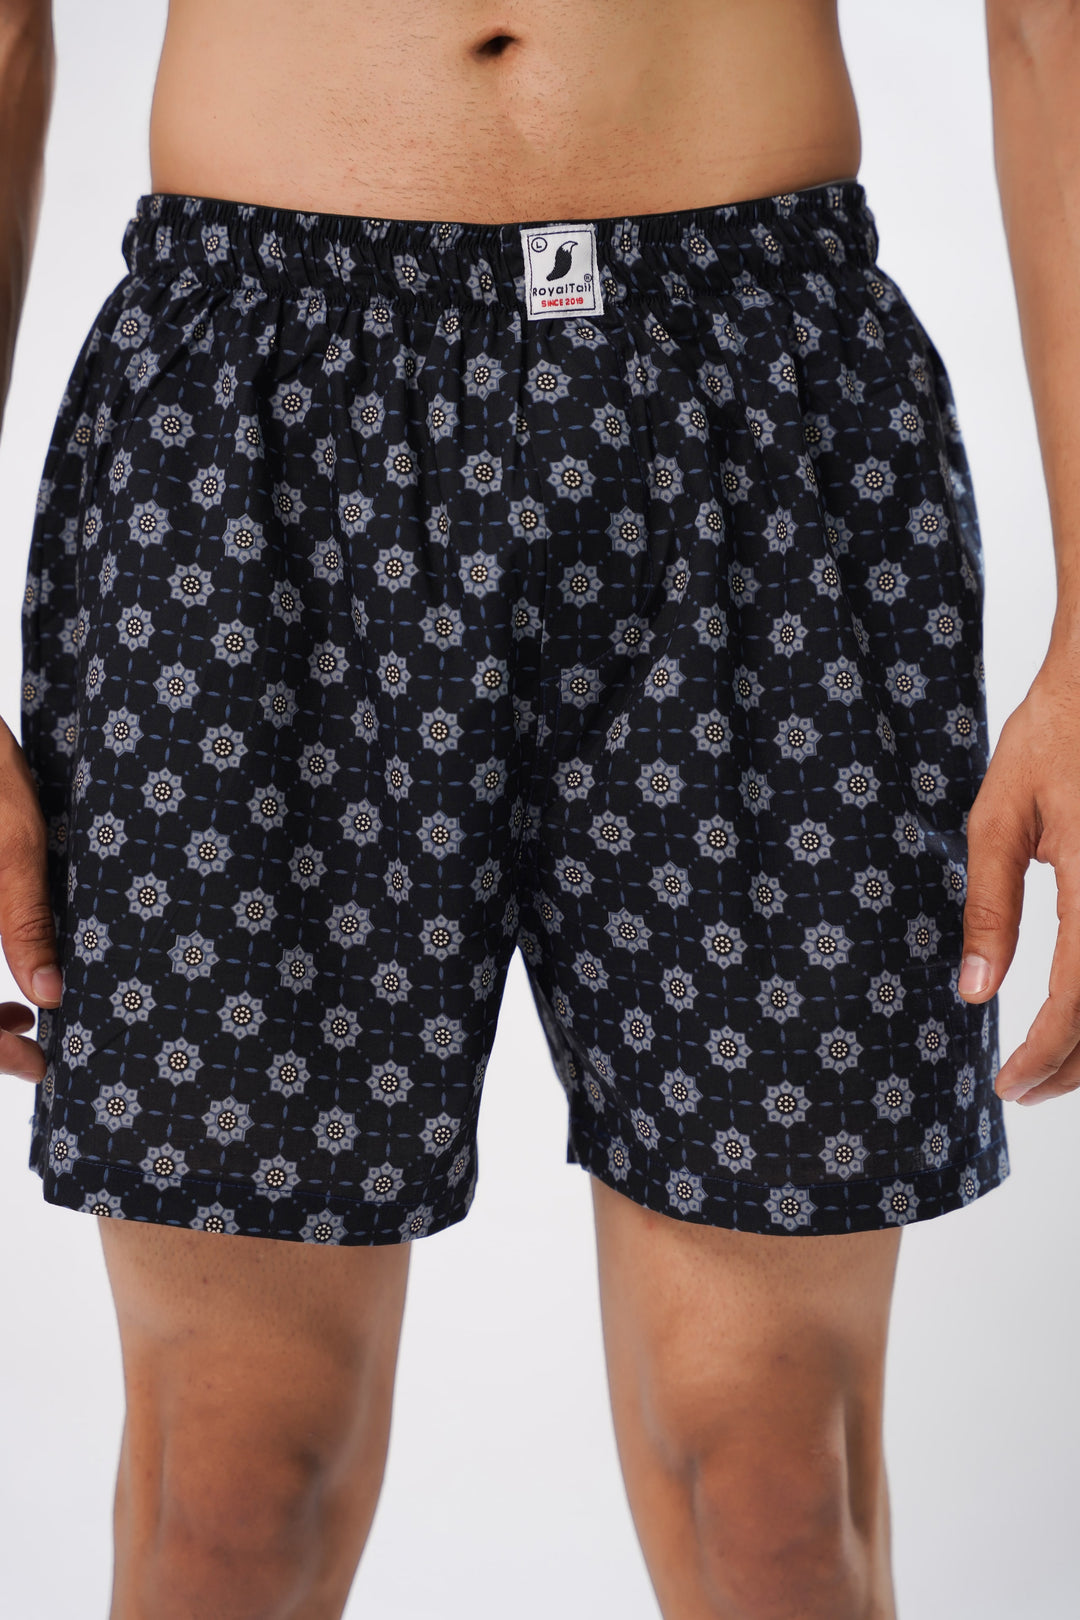 Black and White All-Over Printed Men's Boxers - Royaltail